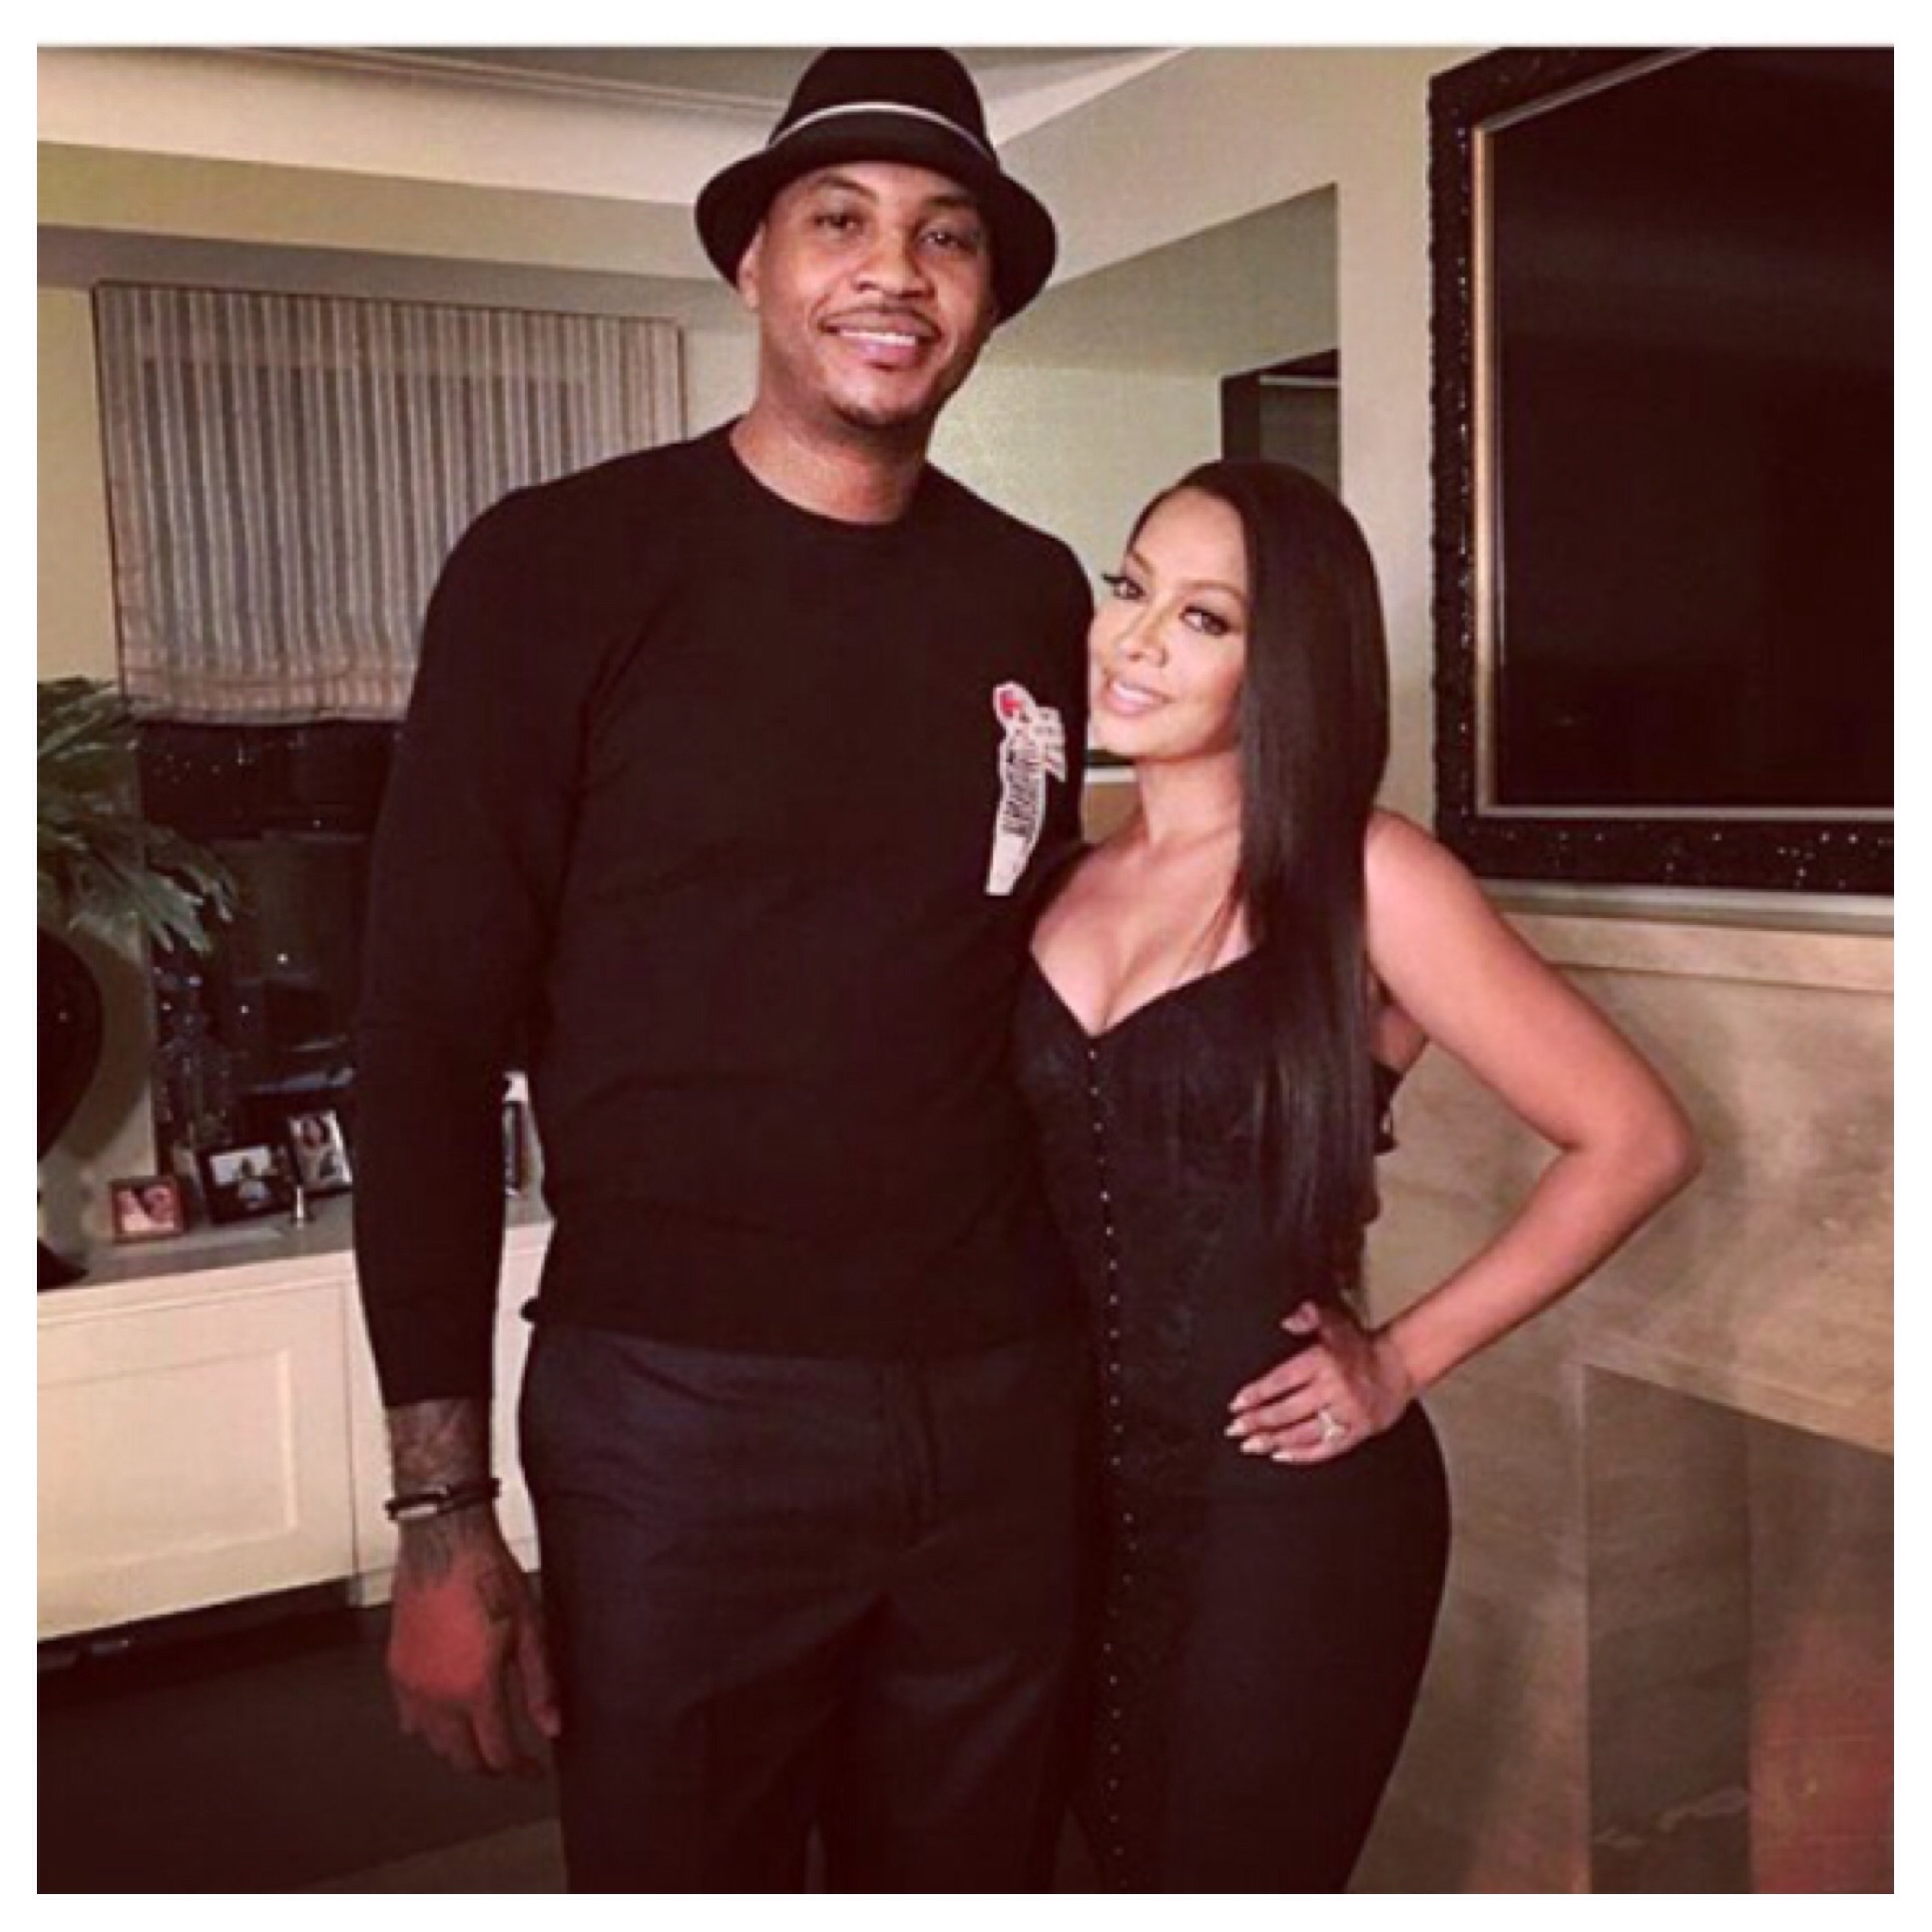 It’s True…Carmelo Anthony And La La Vasquez Has Ended Their 7 Year Marriage. Sources Say Melo’s Getting Ready To Be A New Baby Daddy To A “Fun Girl”!